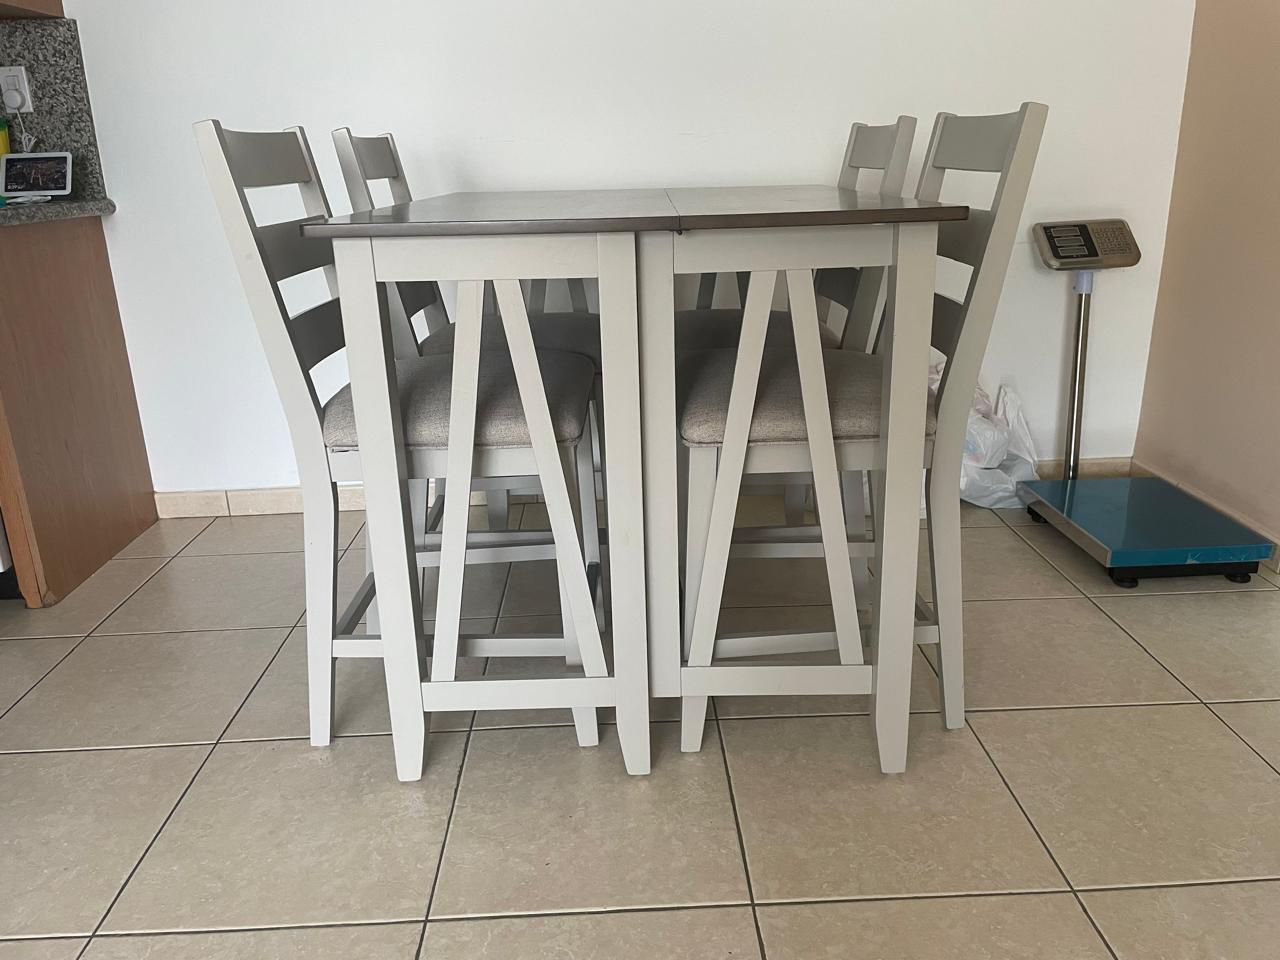 Dinning Table with Chairs